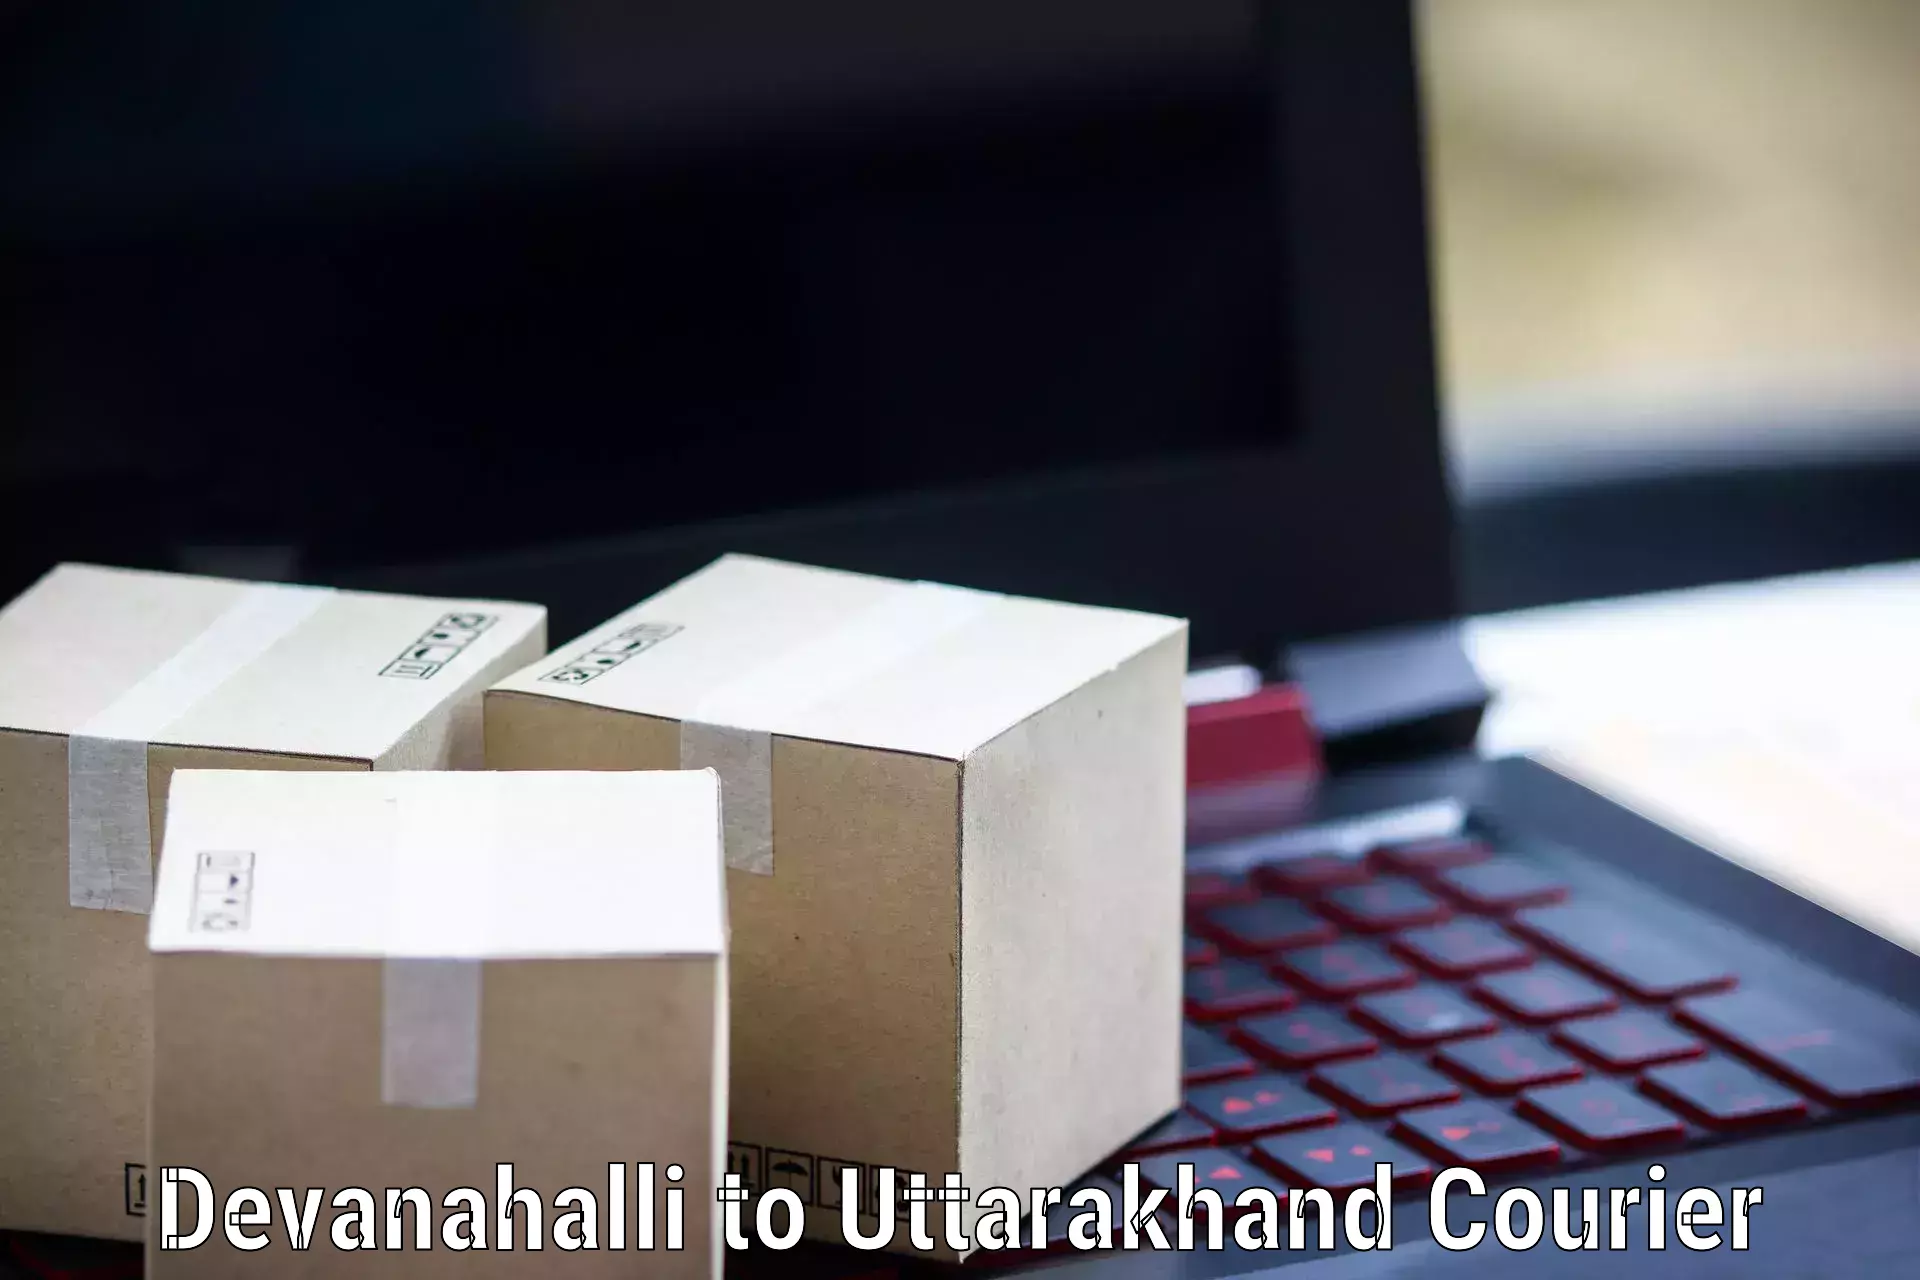 24/7 courier service in Devanahalli to Almora